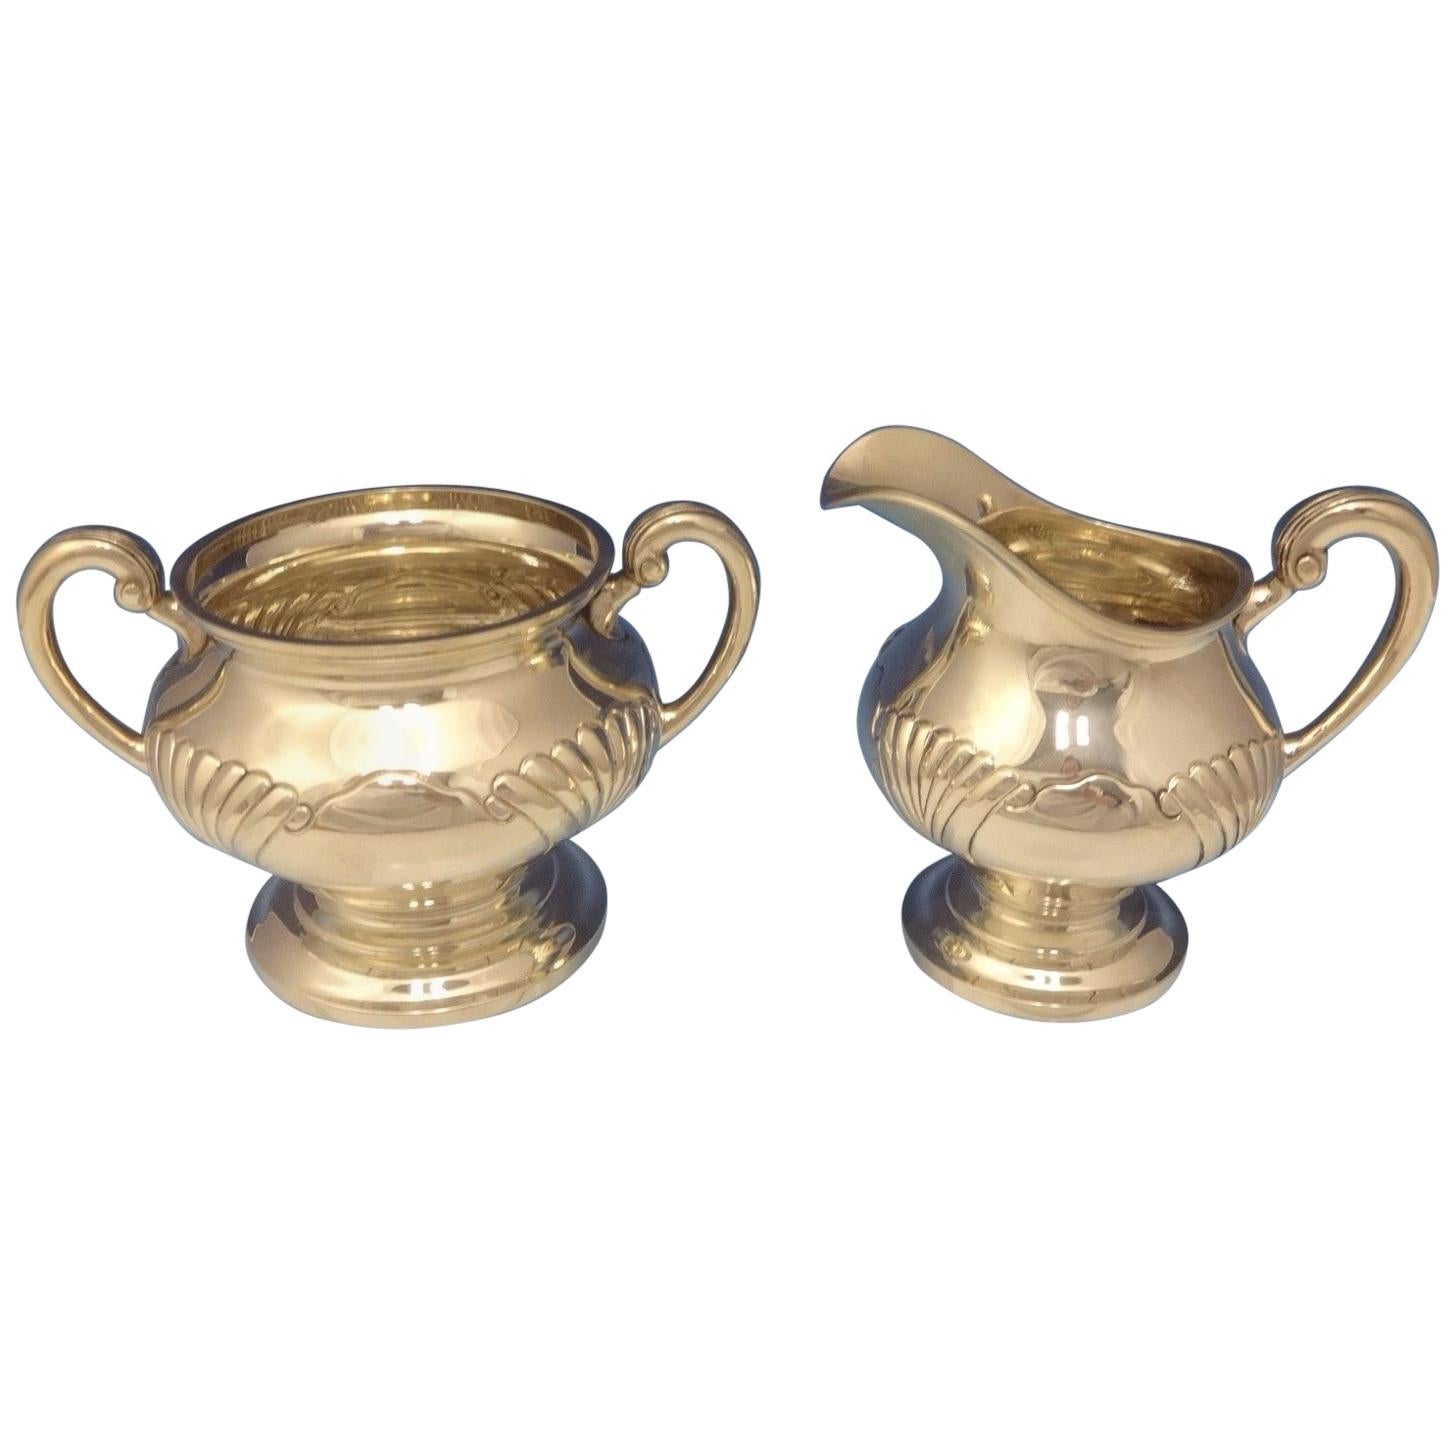 Onslow by Tuttle Sterling Silver Sugar Bowl and Creamer Set of 2-Pieces #1834